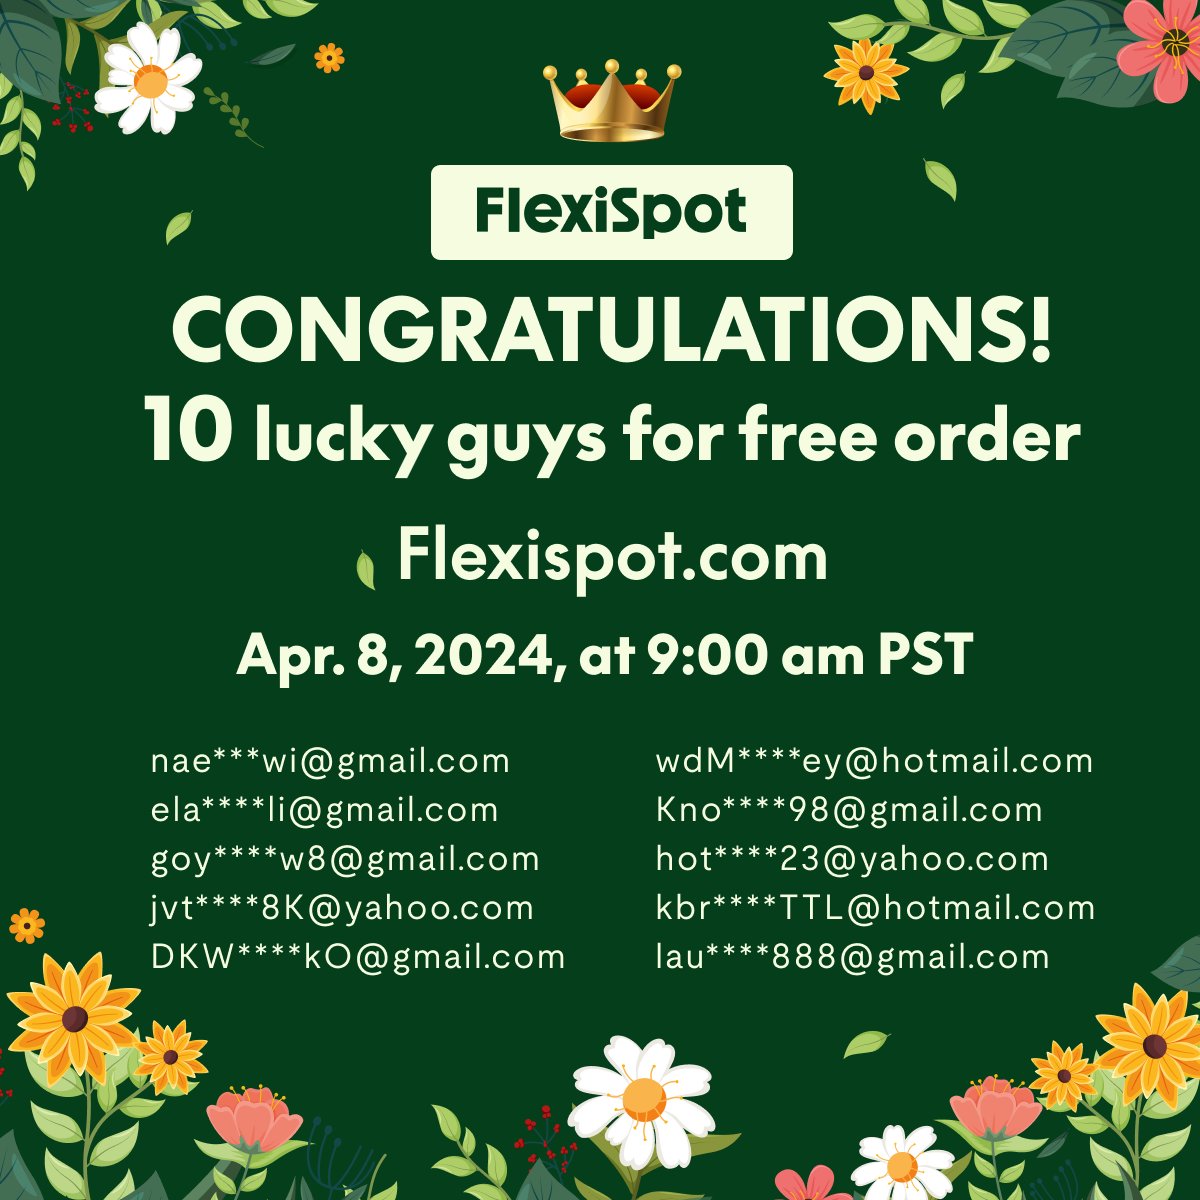 Congrats to the winners of our Spring Free Order Events in Apr. 8th！ Please check your email to claim the prize if you are on the list!#flexispot